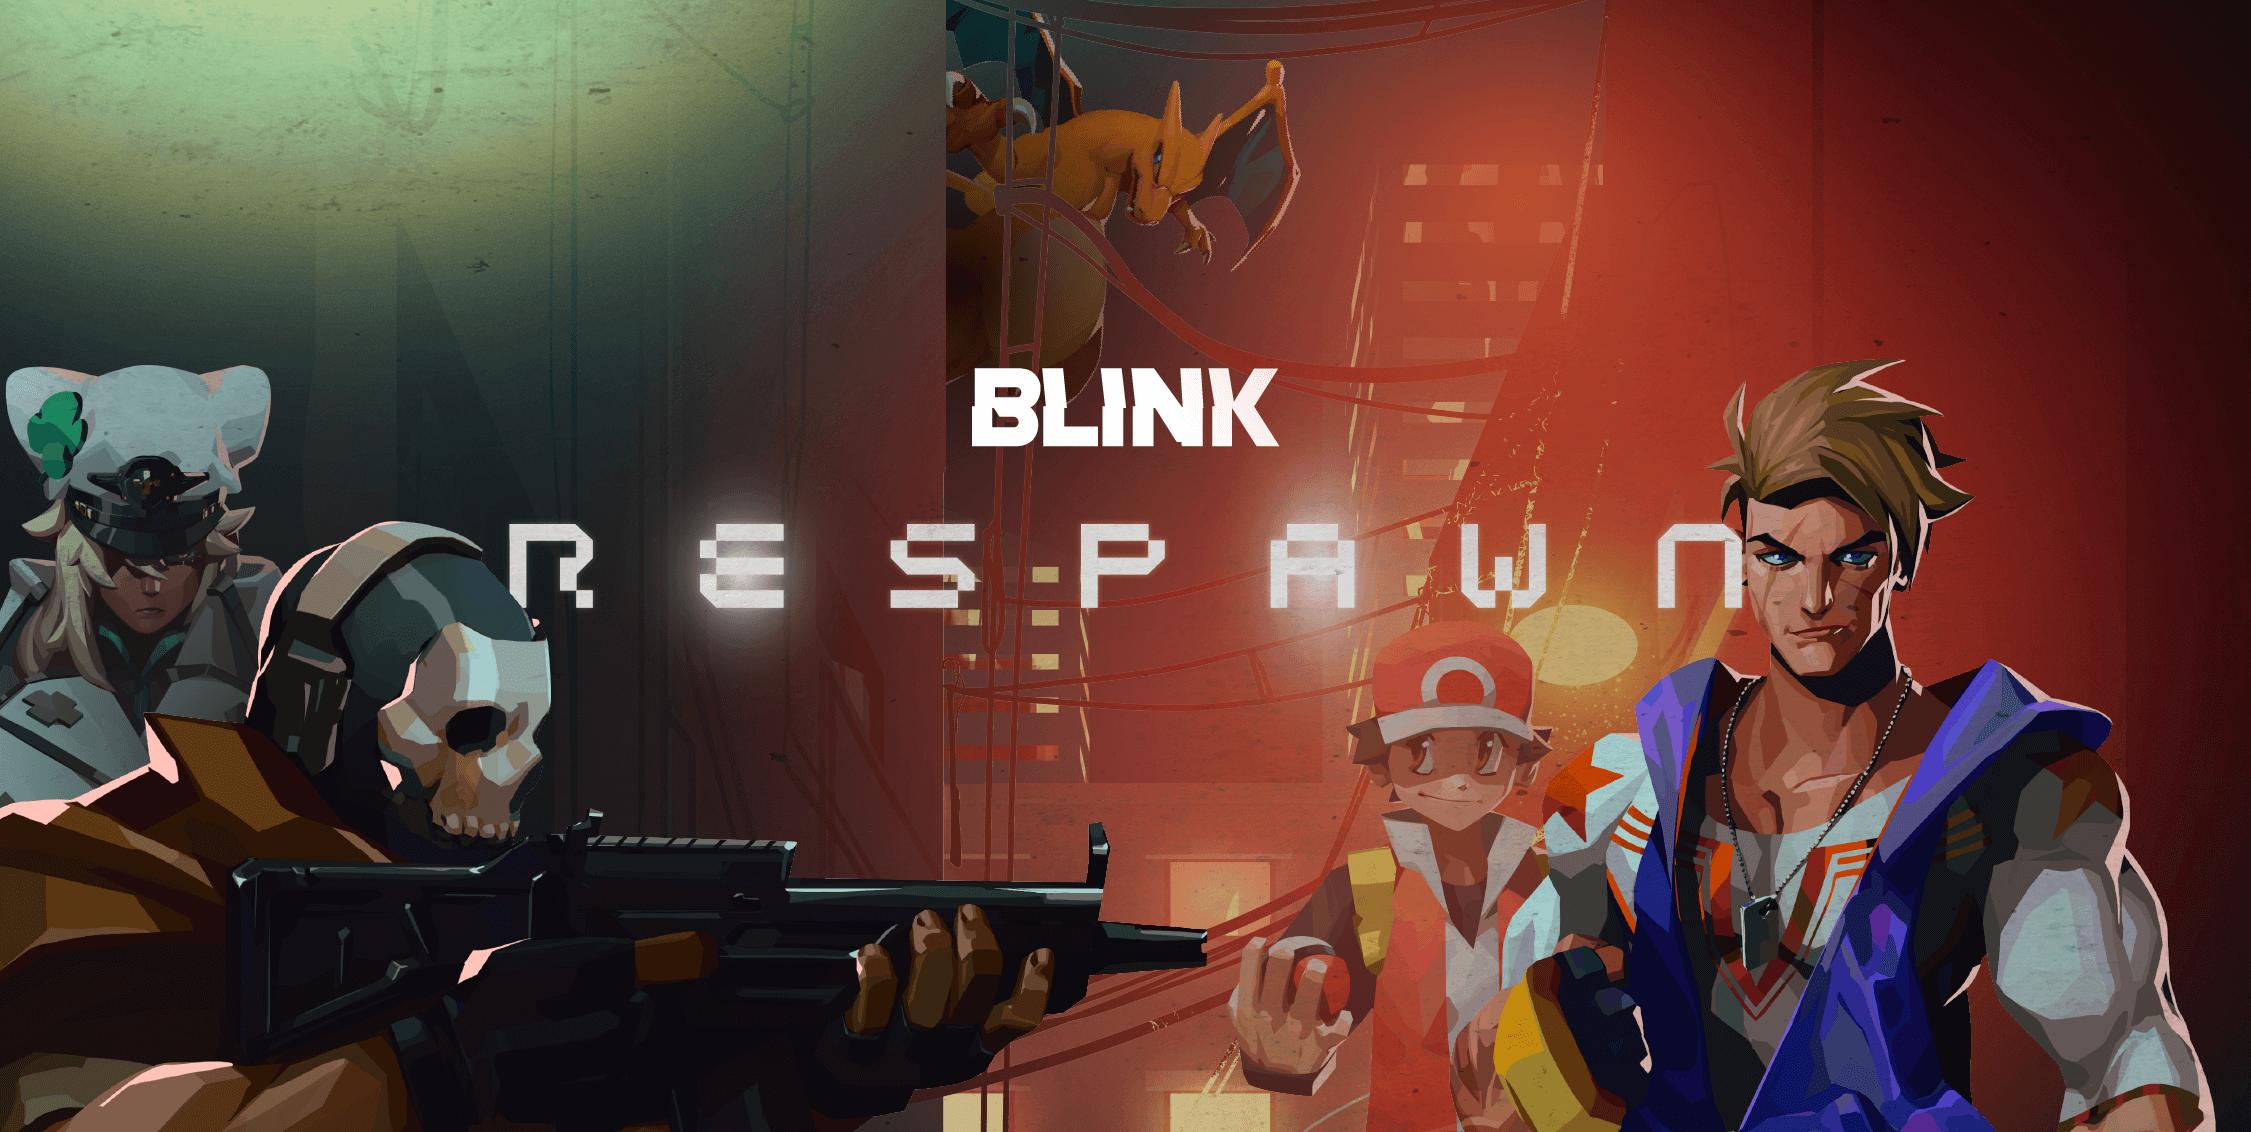 BLINK RESPAWN 2022: DRAGON BALL FighterZ Results